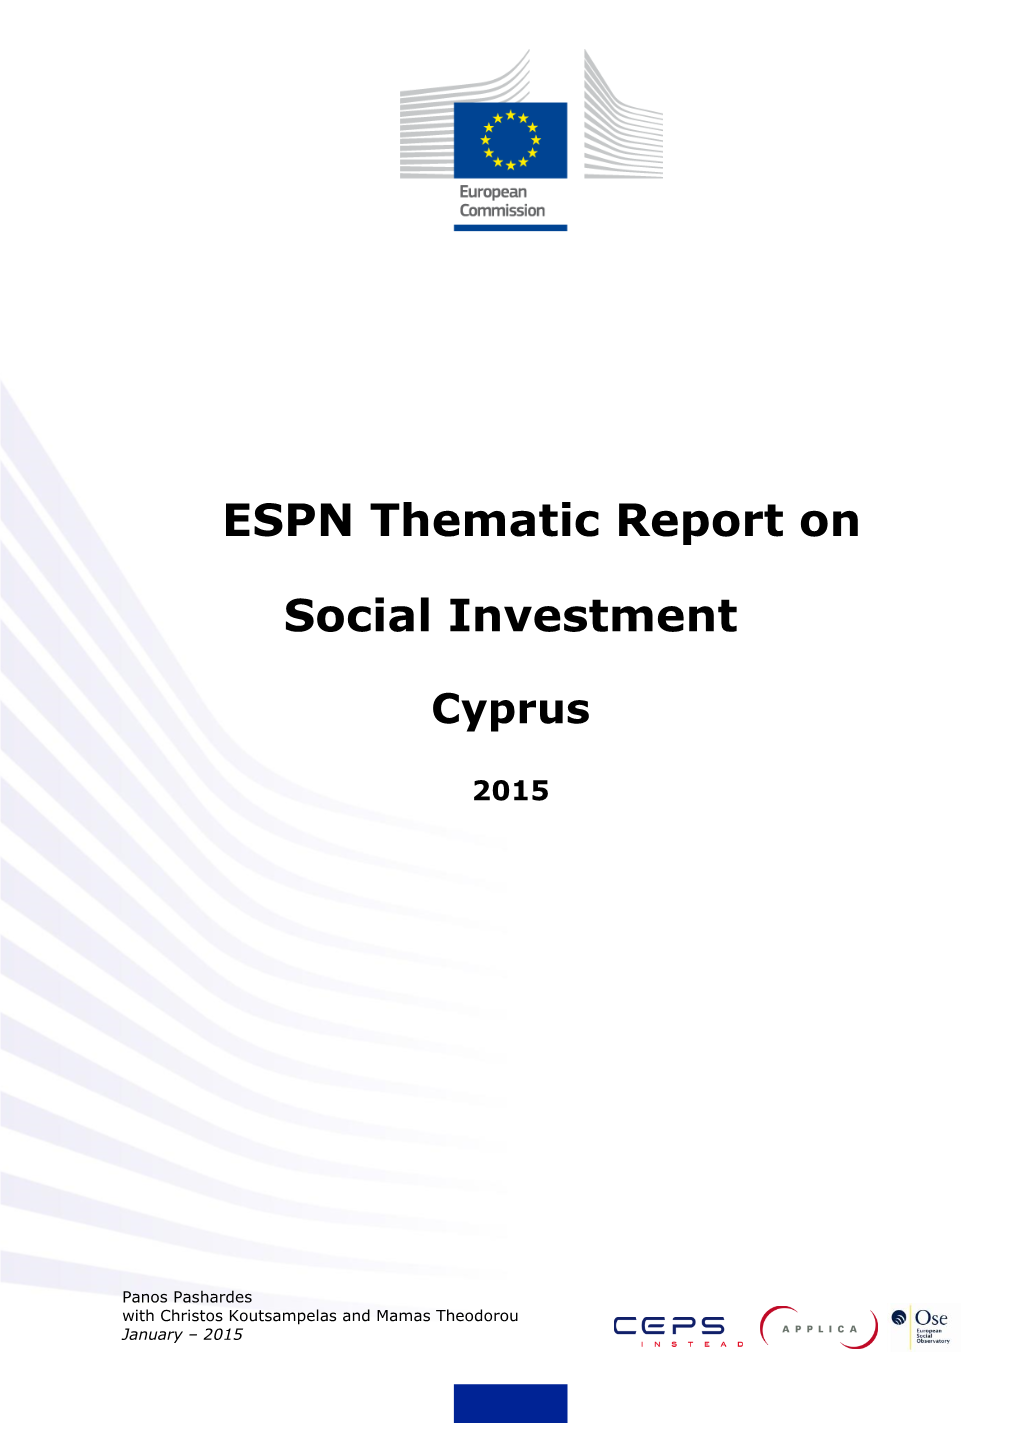 ESPN Thematic Report on Social Investment